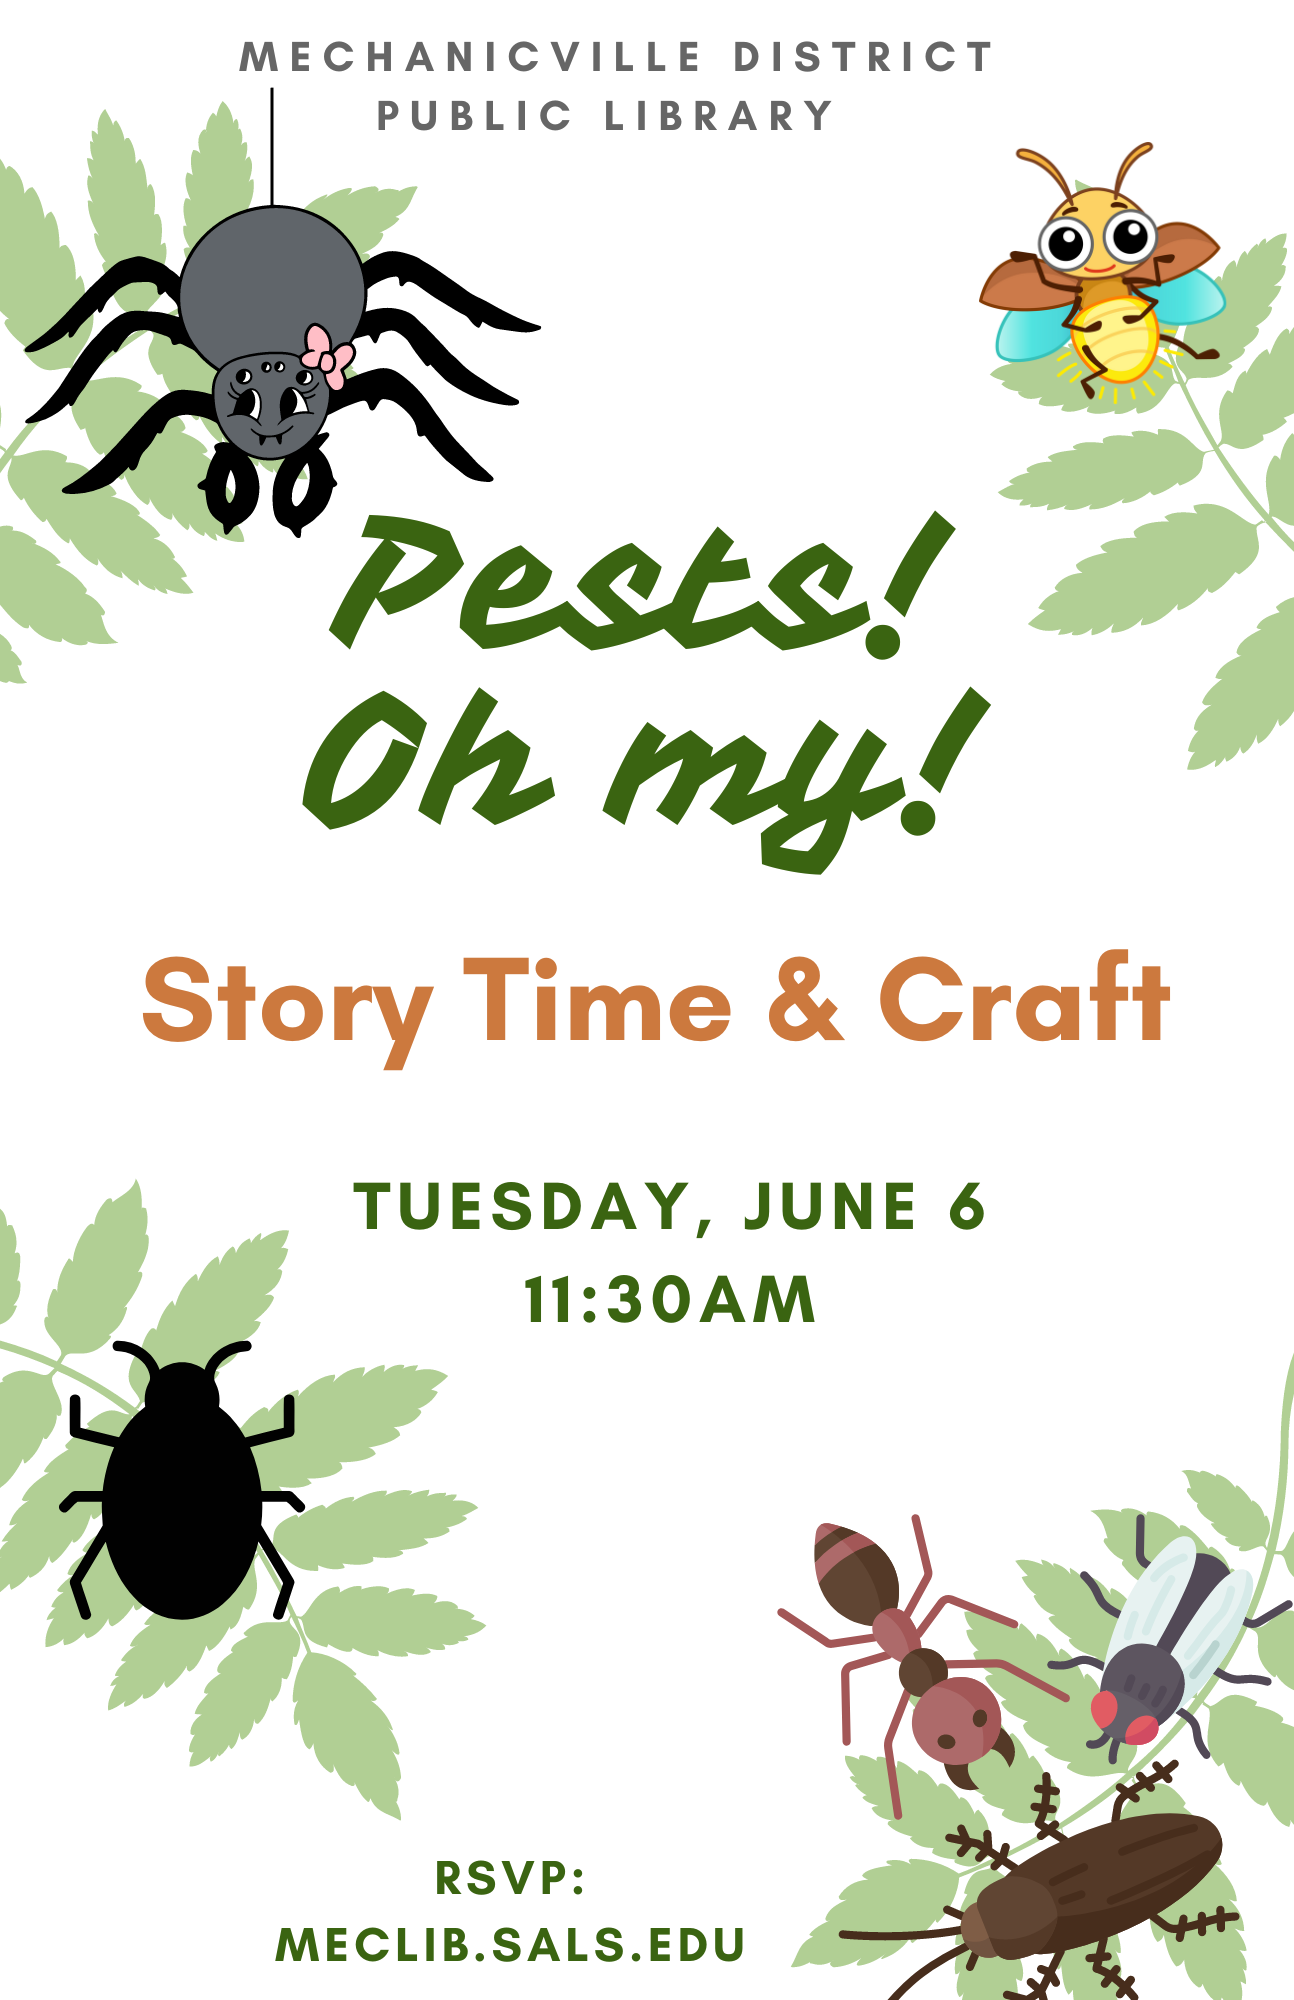 Pests! Story Time & Craft